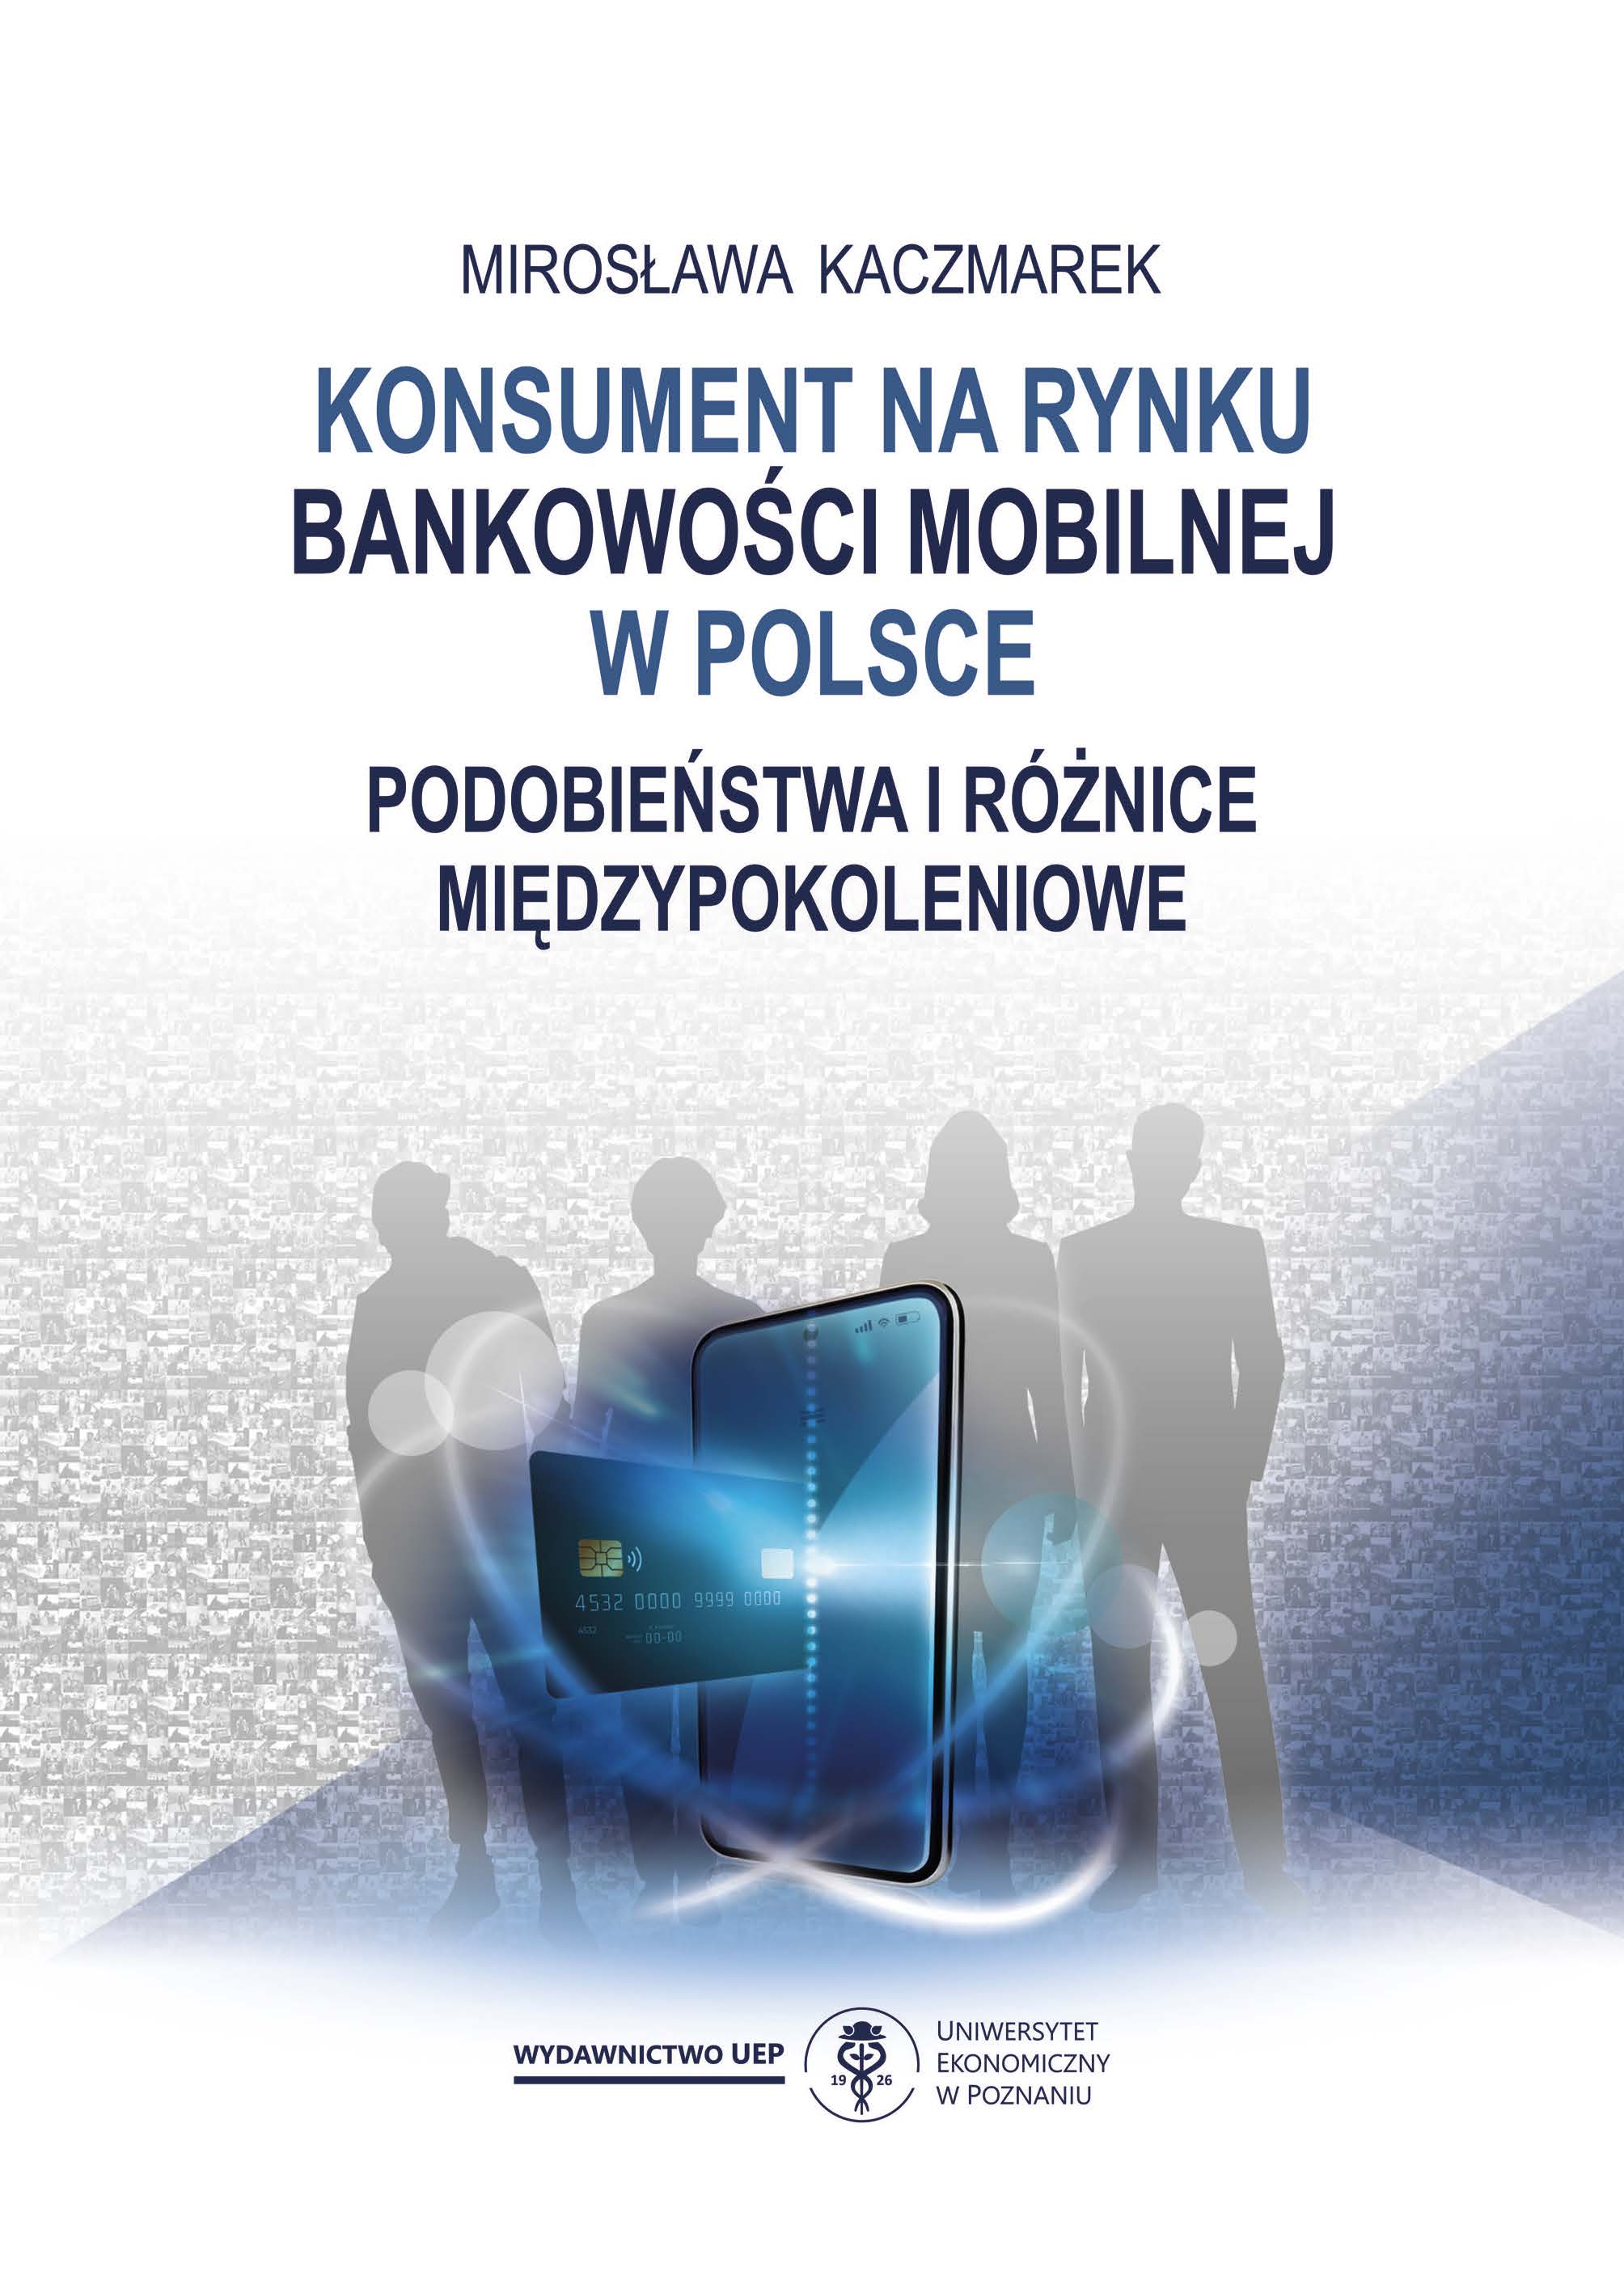 The consumer on the mobile banking market in Poland.
Intergenerational similarities and differences